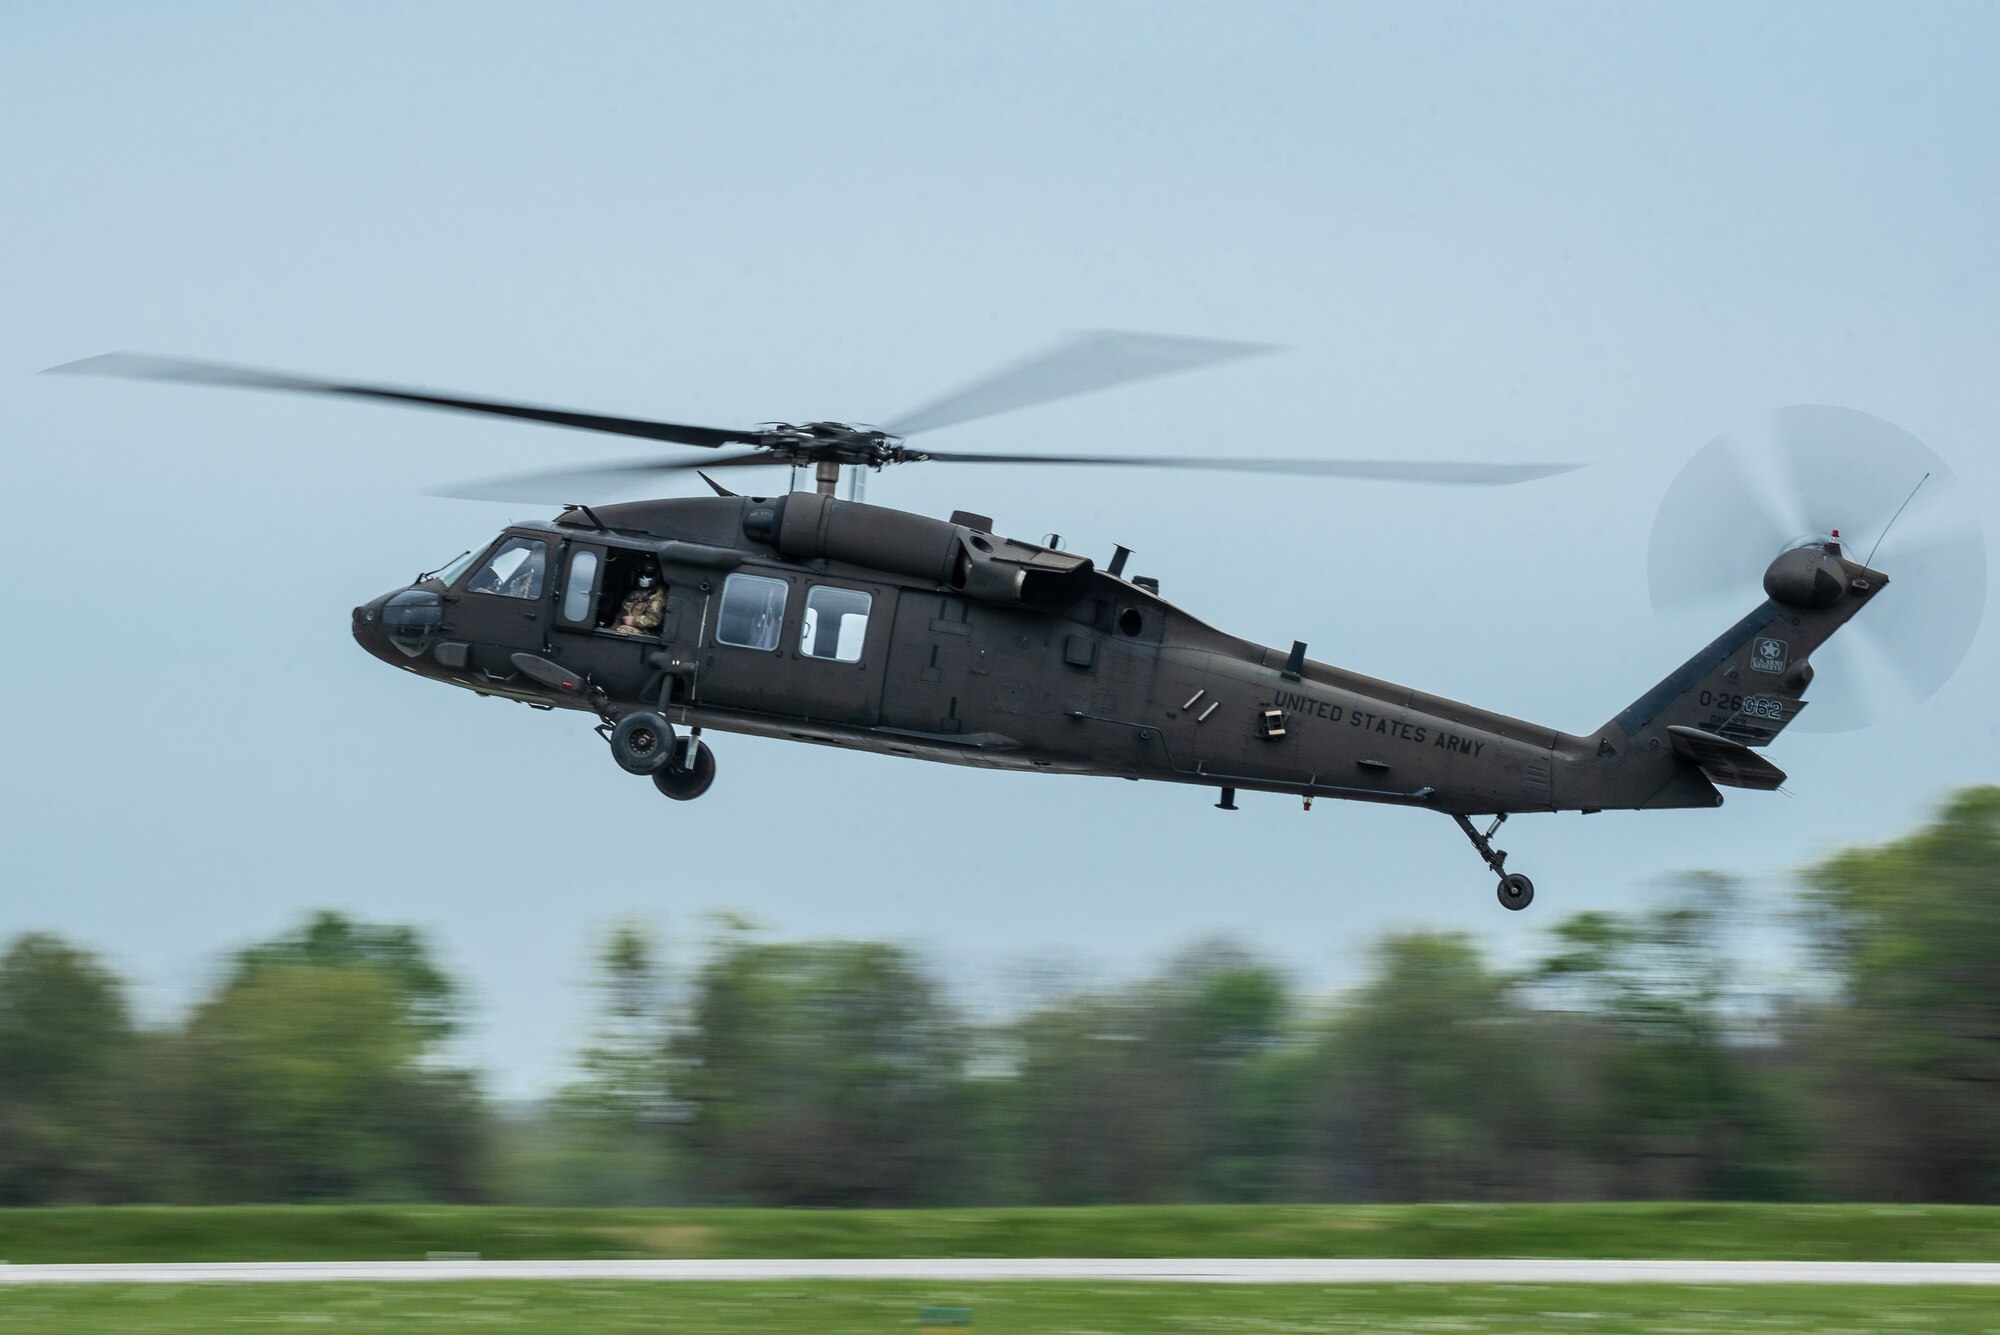 A U.S. Army Reserve UH-60 Blackhawk helicopter performs an aerial demonstration over Bowman Field in Louisville, Ky., April 17, 2021, as part of the Thunder Over Louisville air show. The annual event featured more than 20 military and civilian air craft this year. (U.S. Air National Guard photo by Dale Greer)